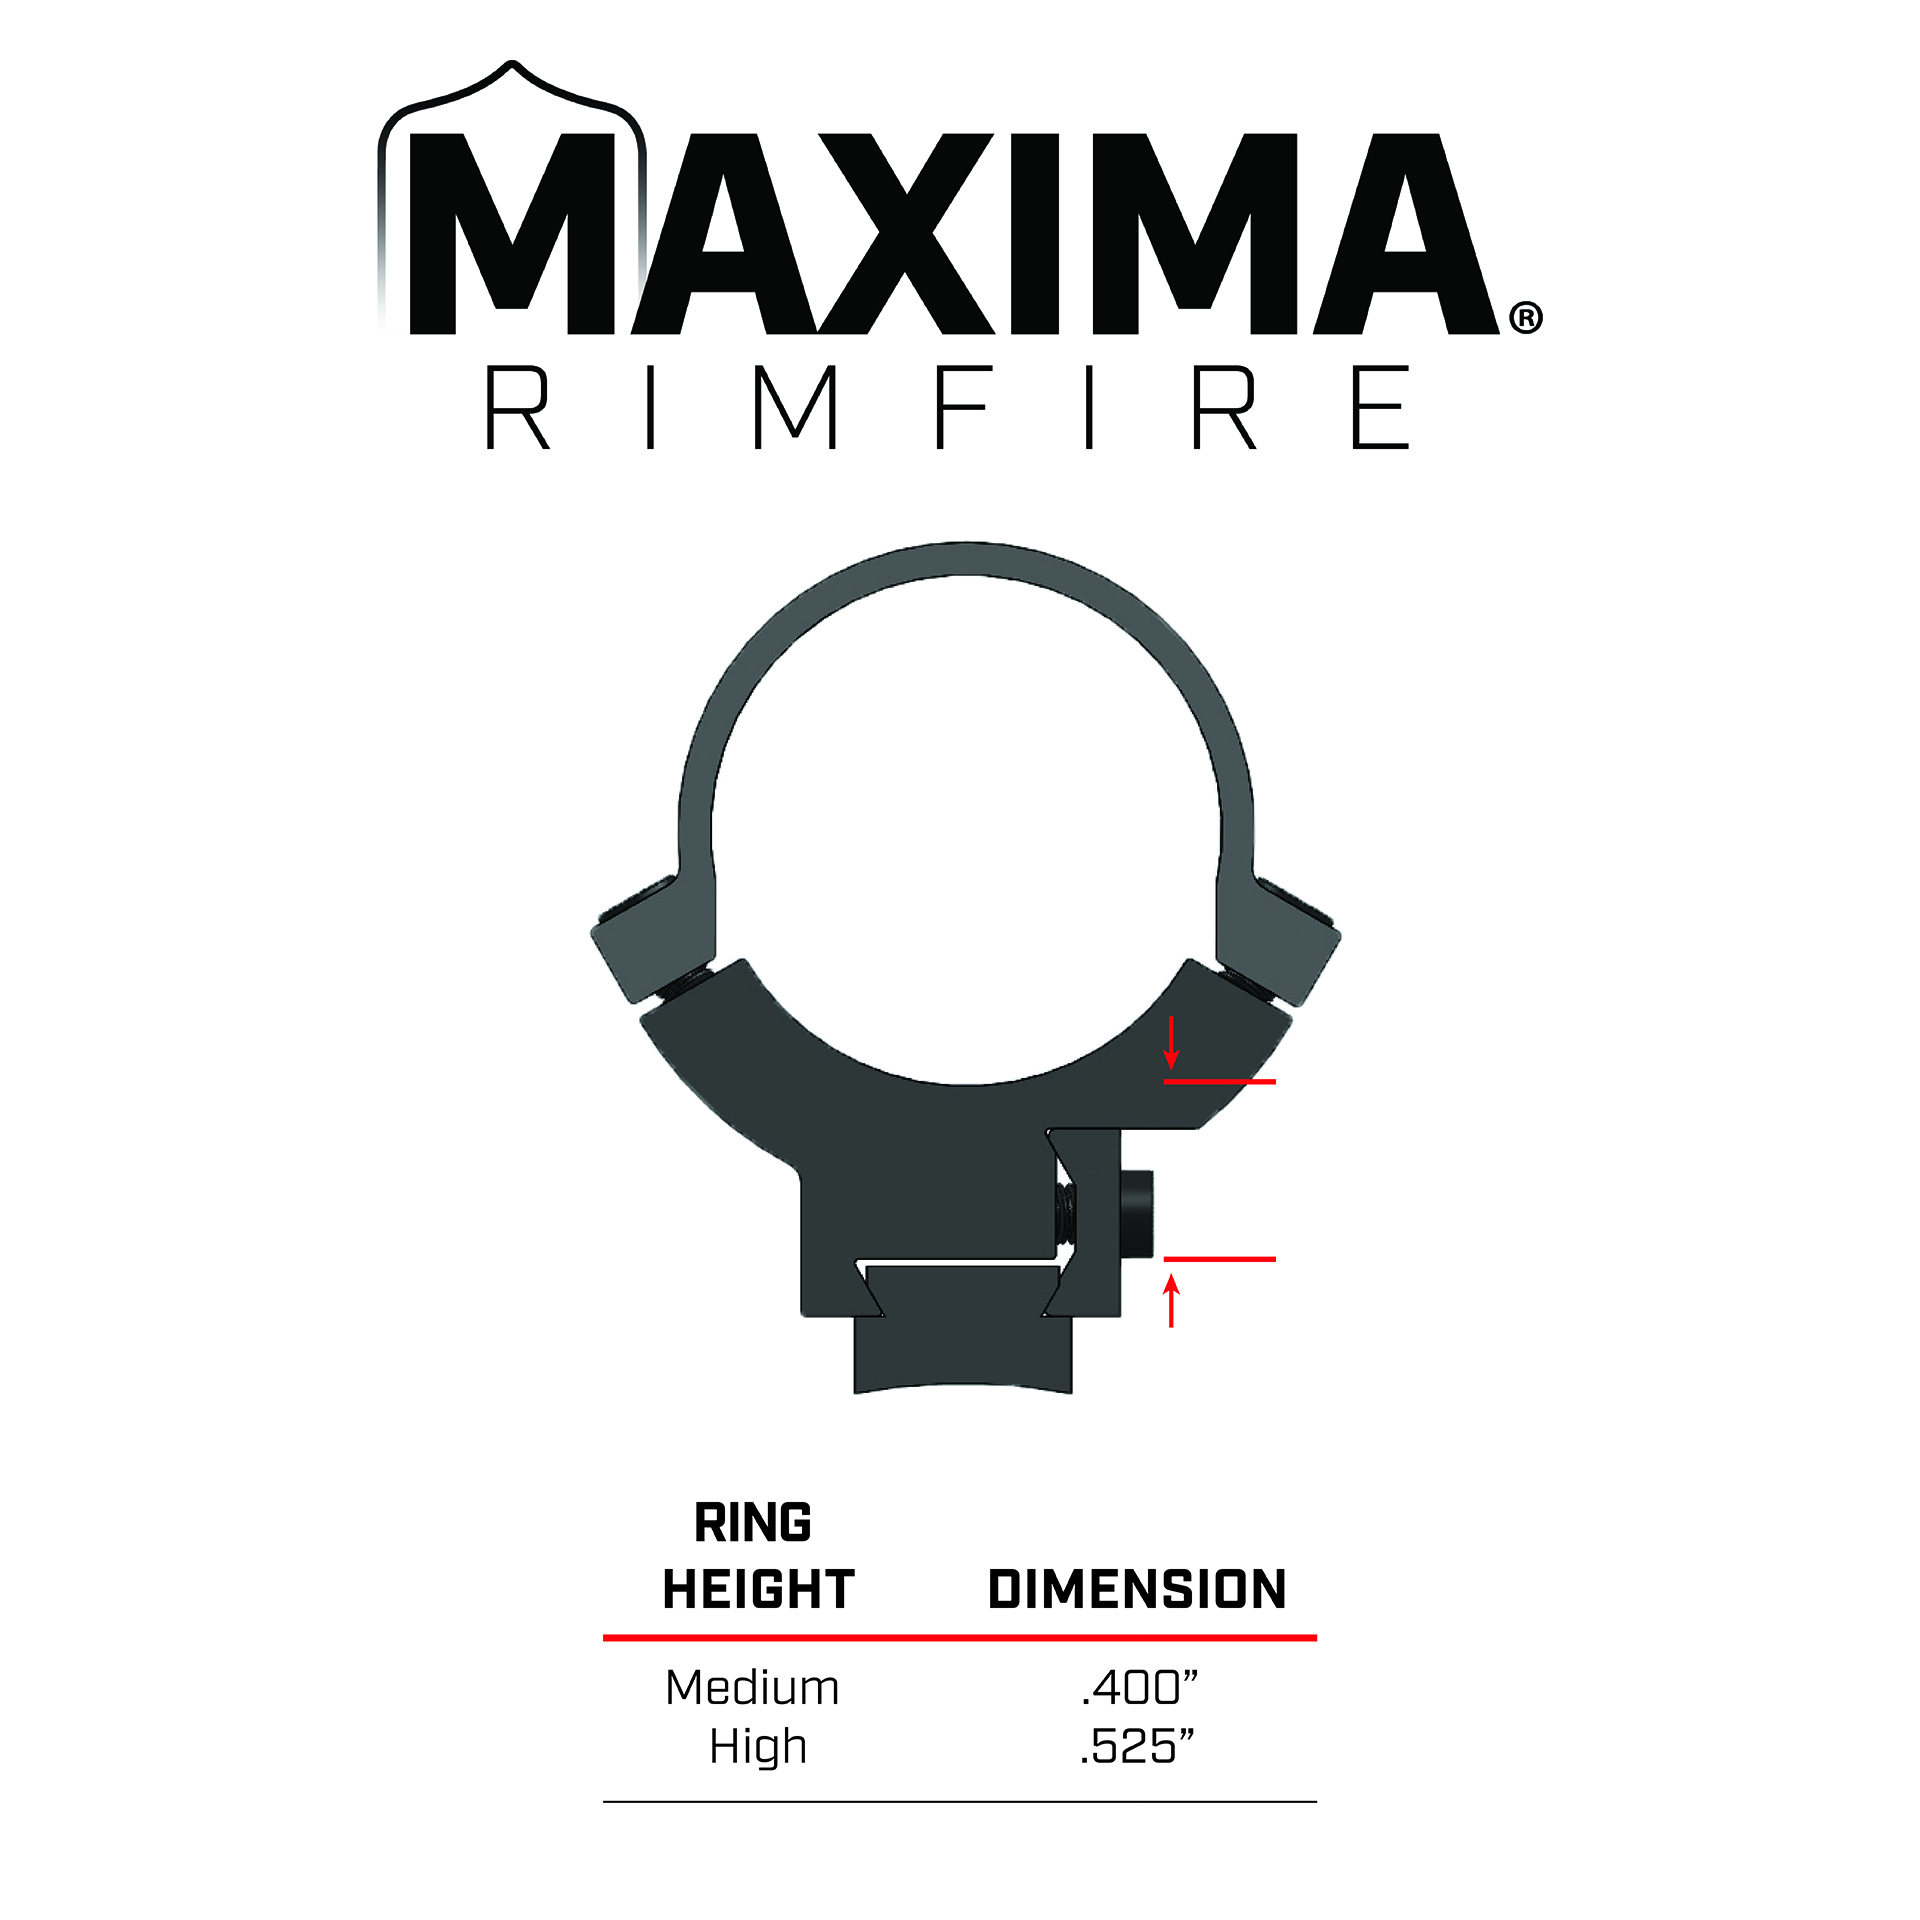 maxima scope ring height for rimfire rings. med .400 inch, high .525 inch